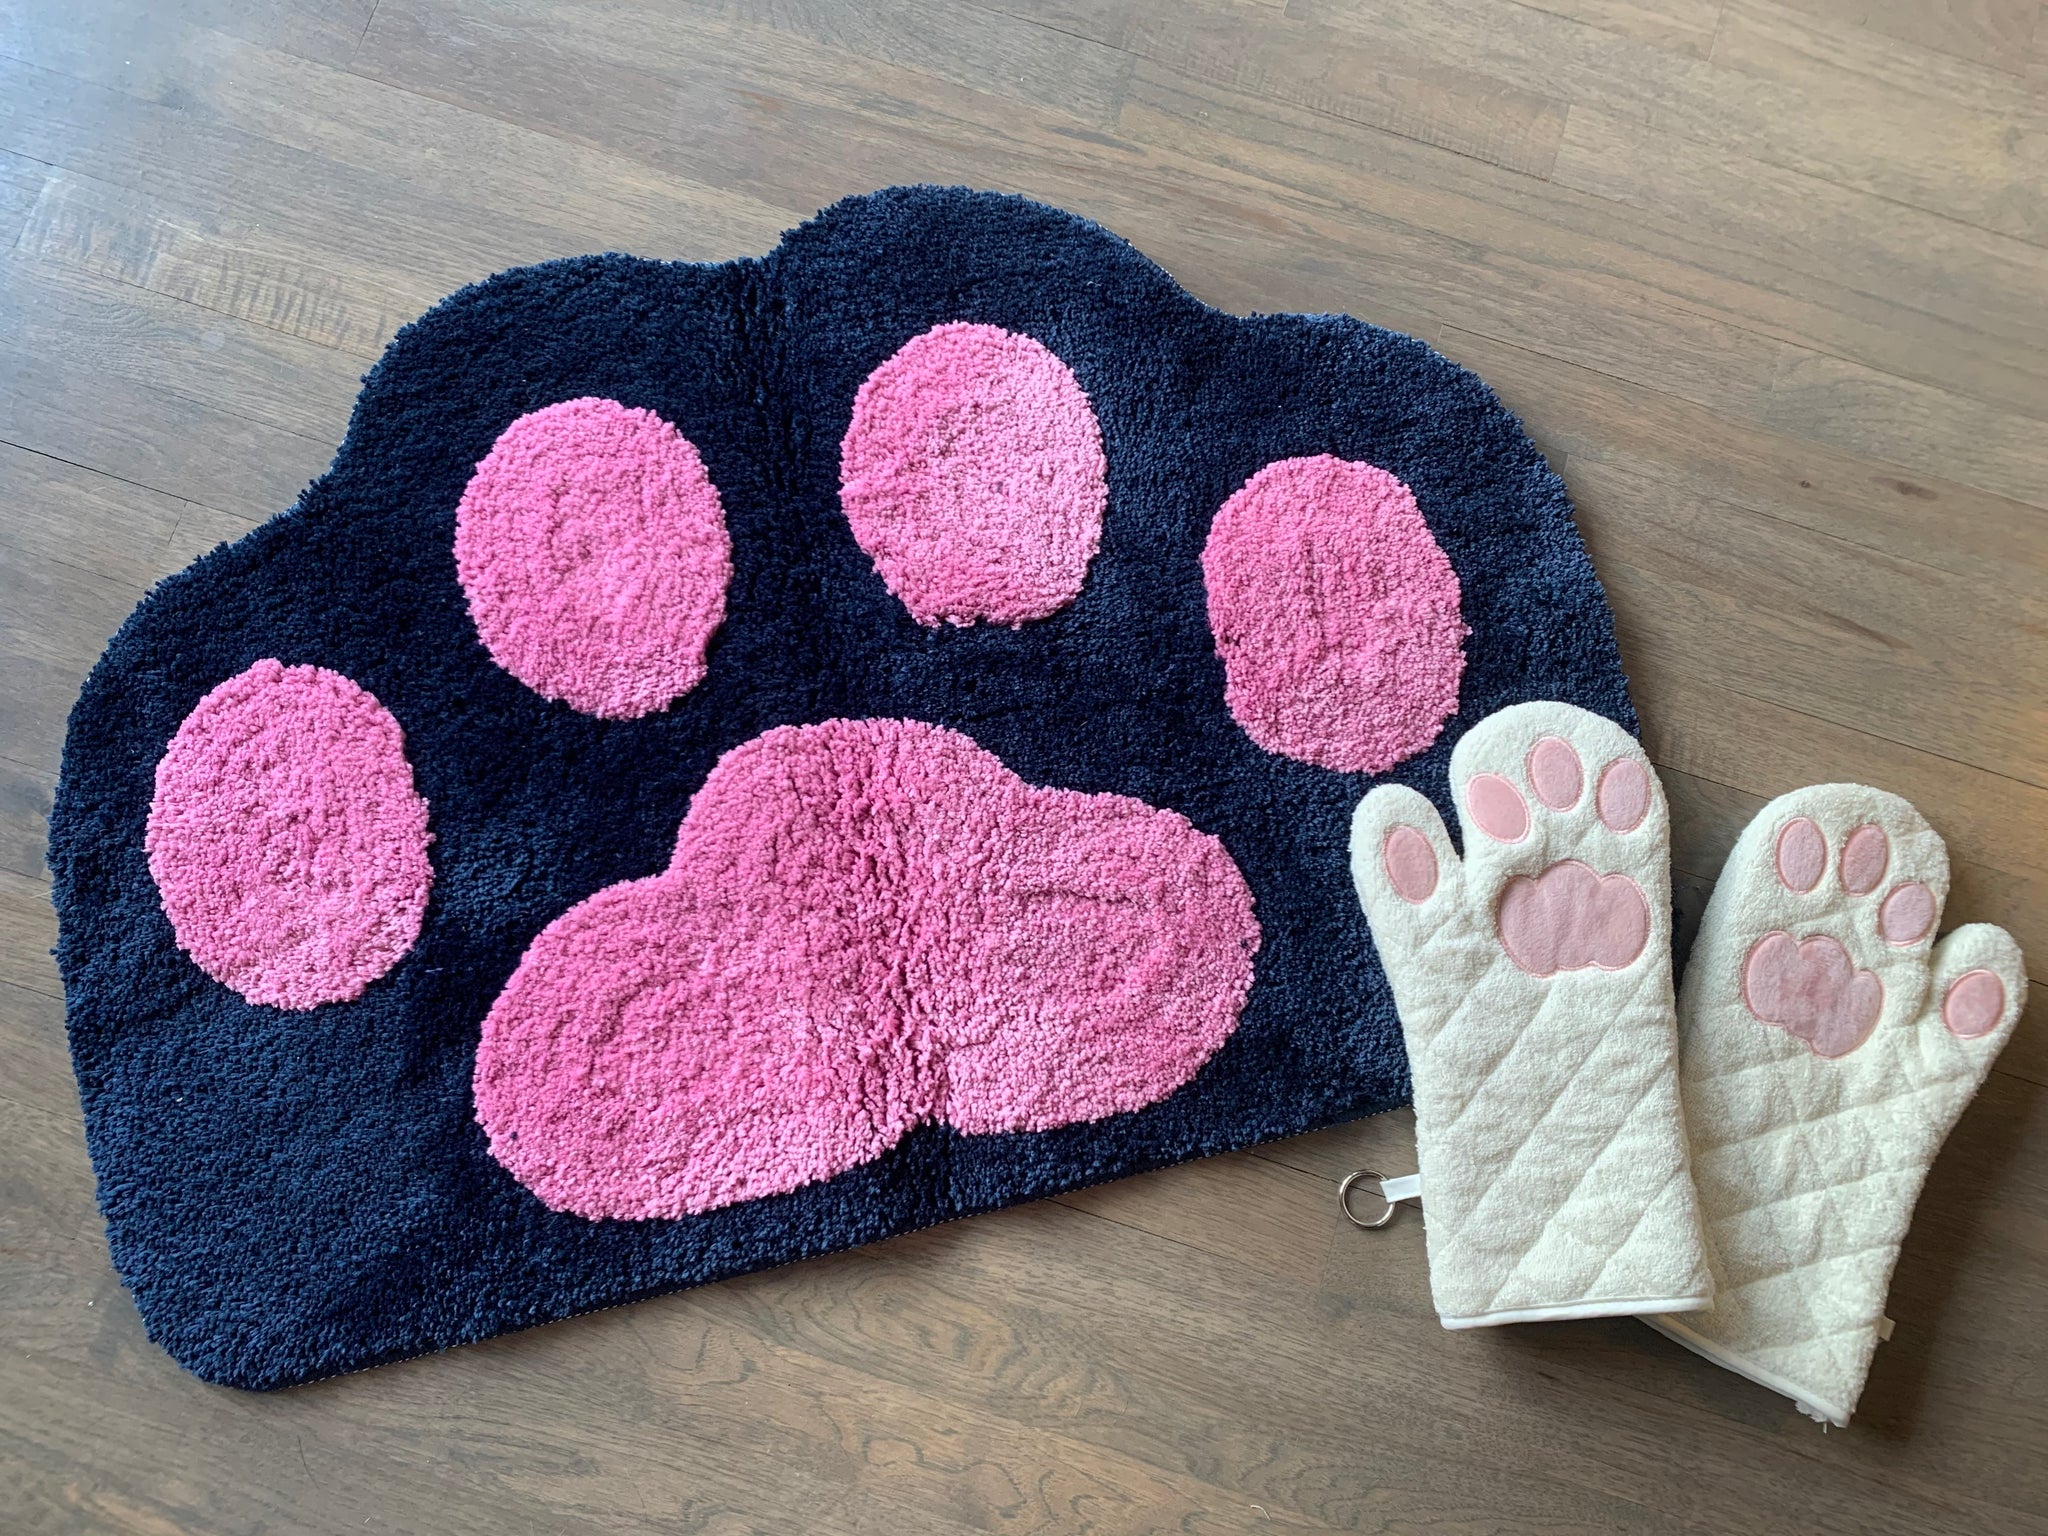 Cricket and Junebug Oven Mitts Cat Paws - Black & Pink